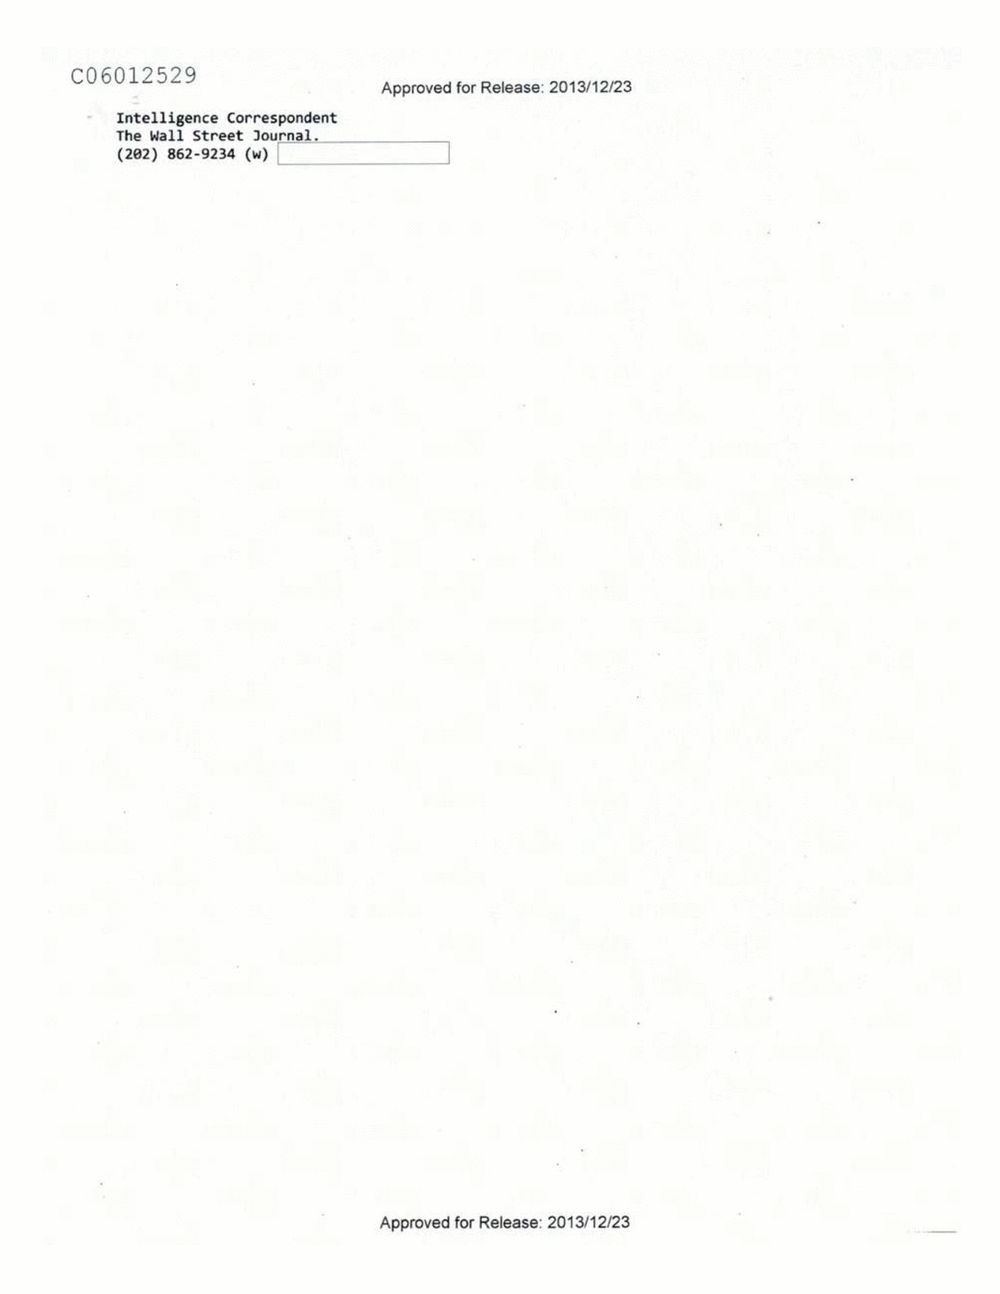 Page 58 from Email Correspondence Between Reporters and CIA Flacks